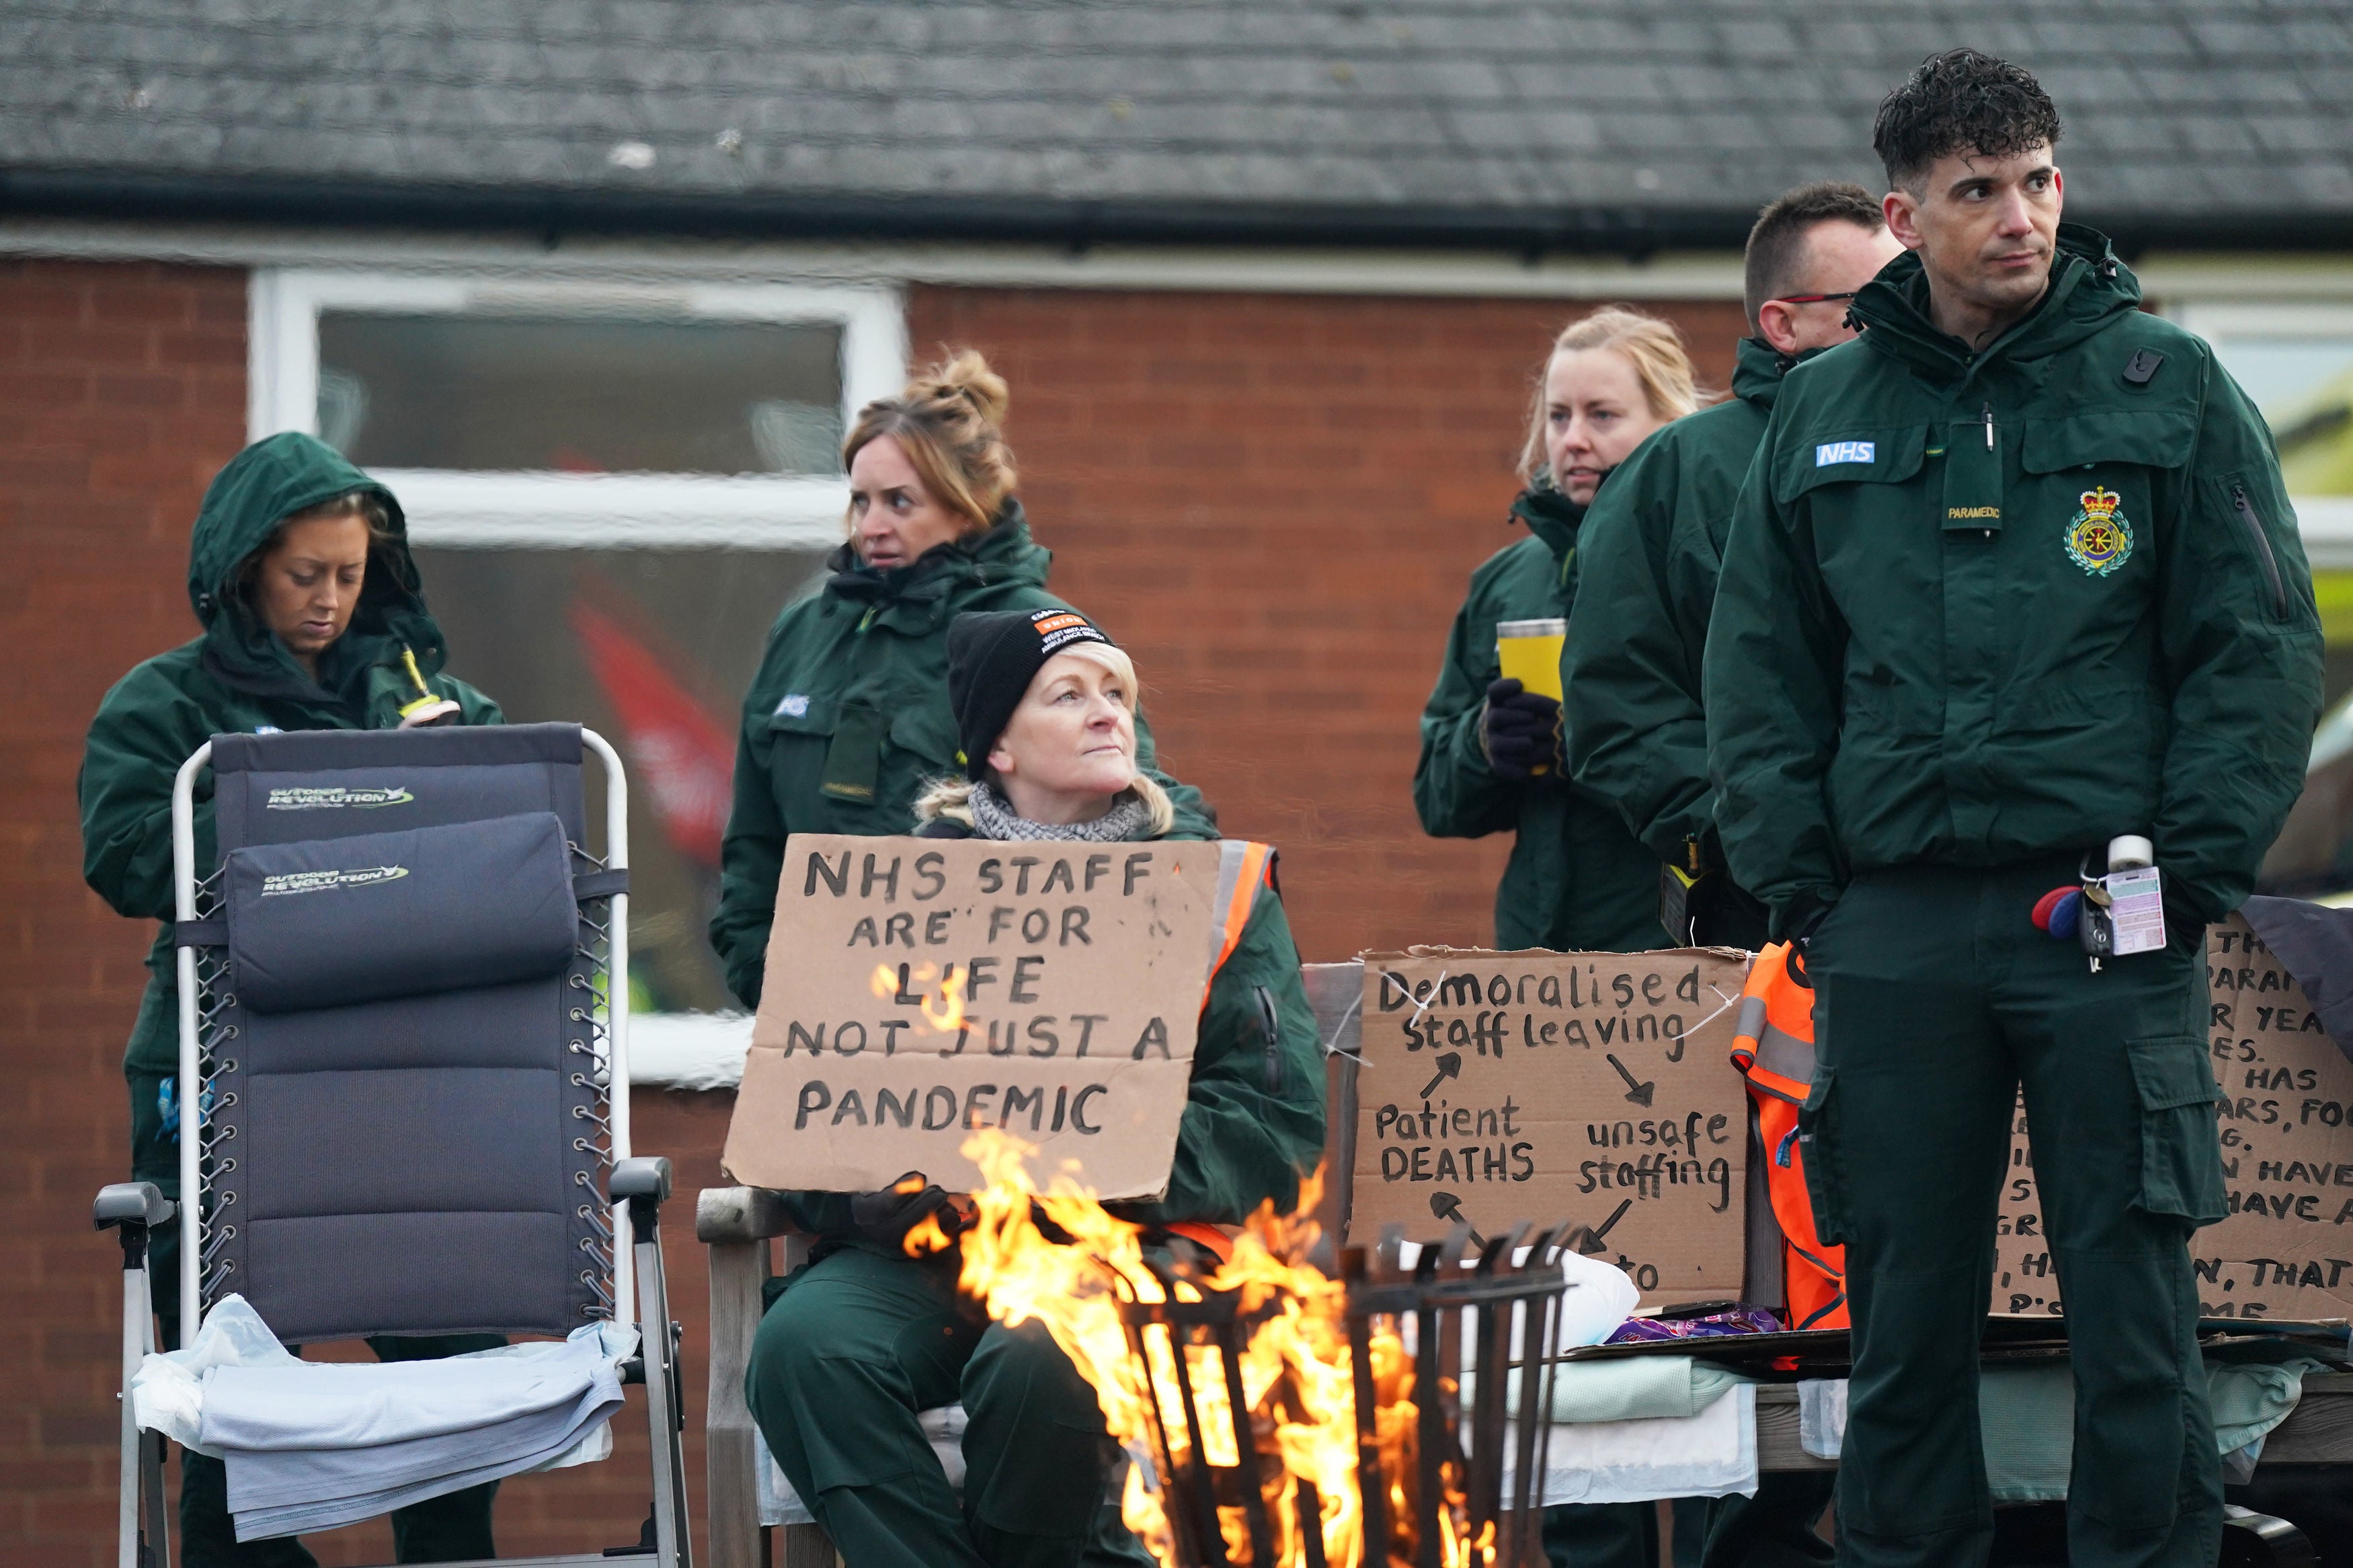 Ambulance workers have previously held strike action over pay and conditions, with staffing issues cited as a major concern